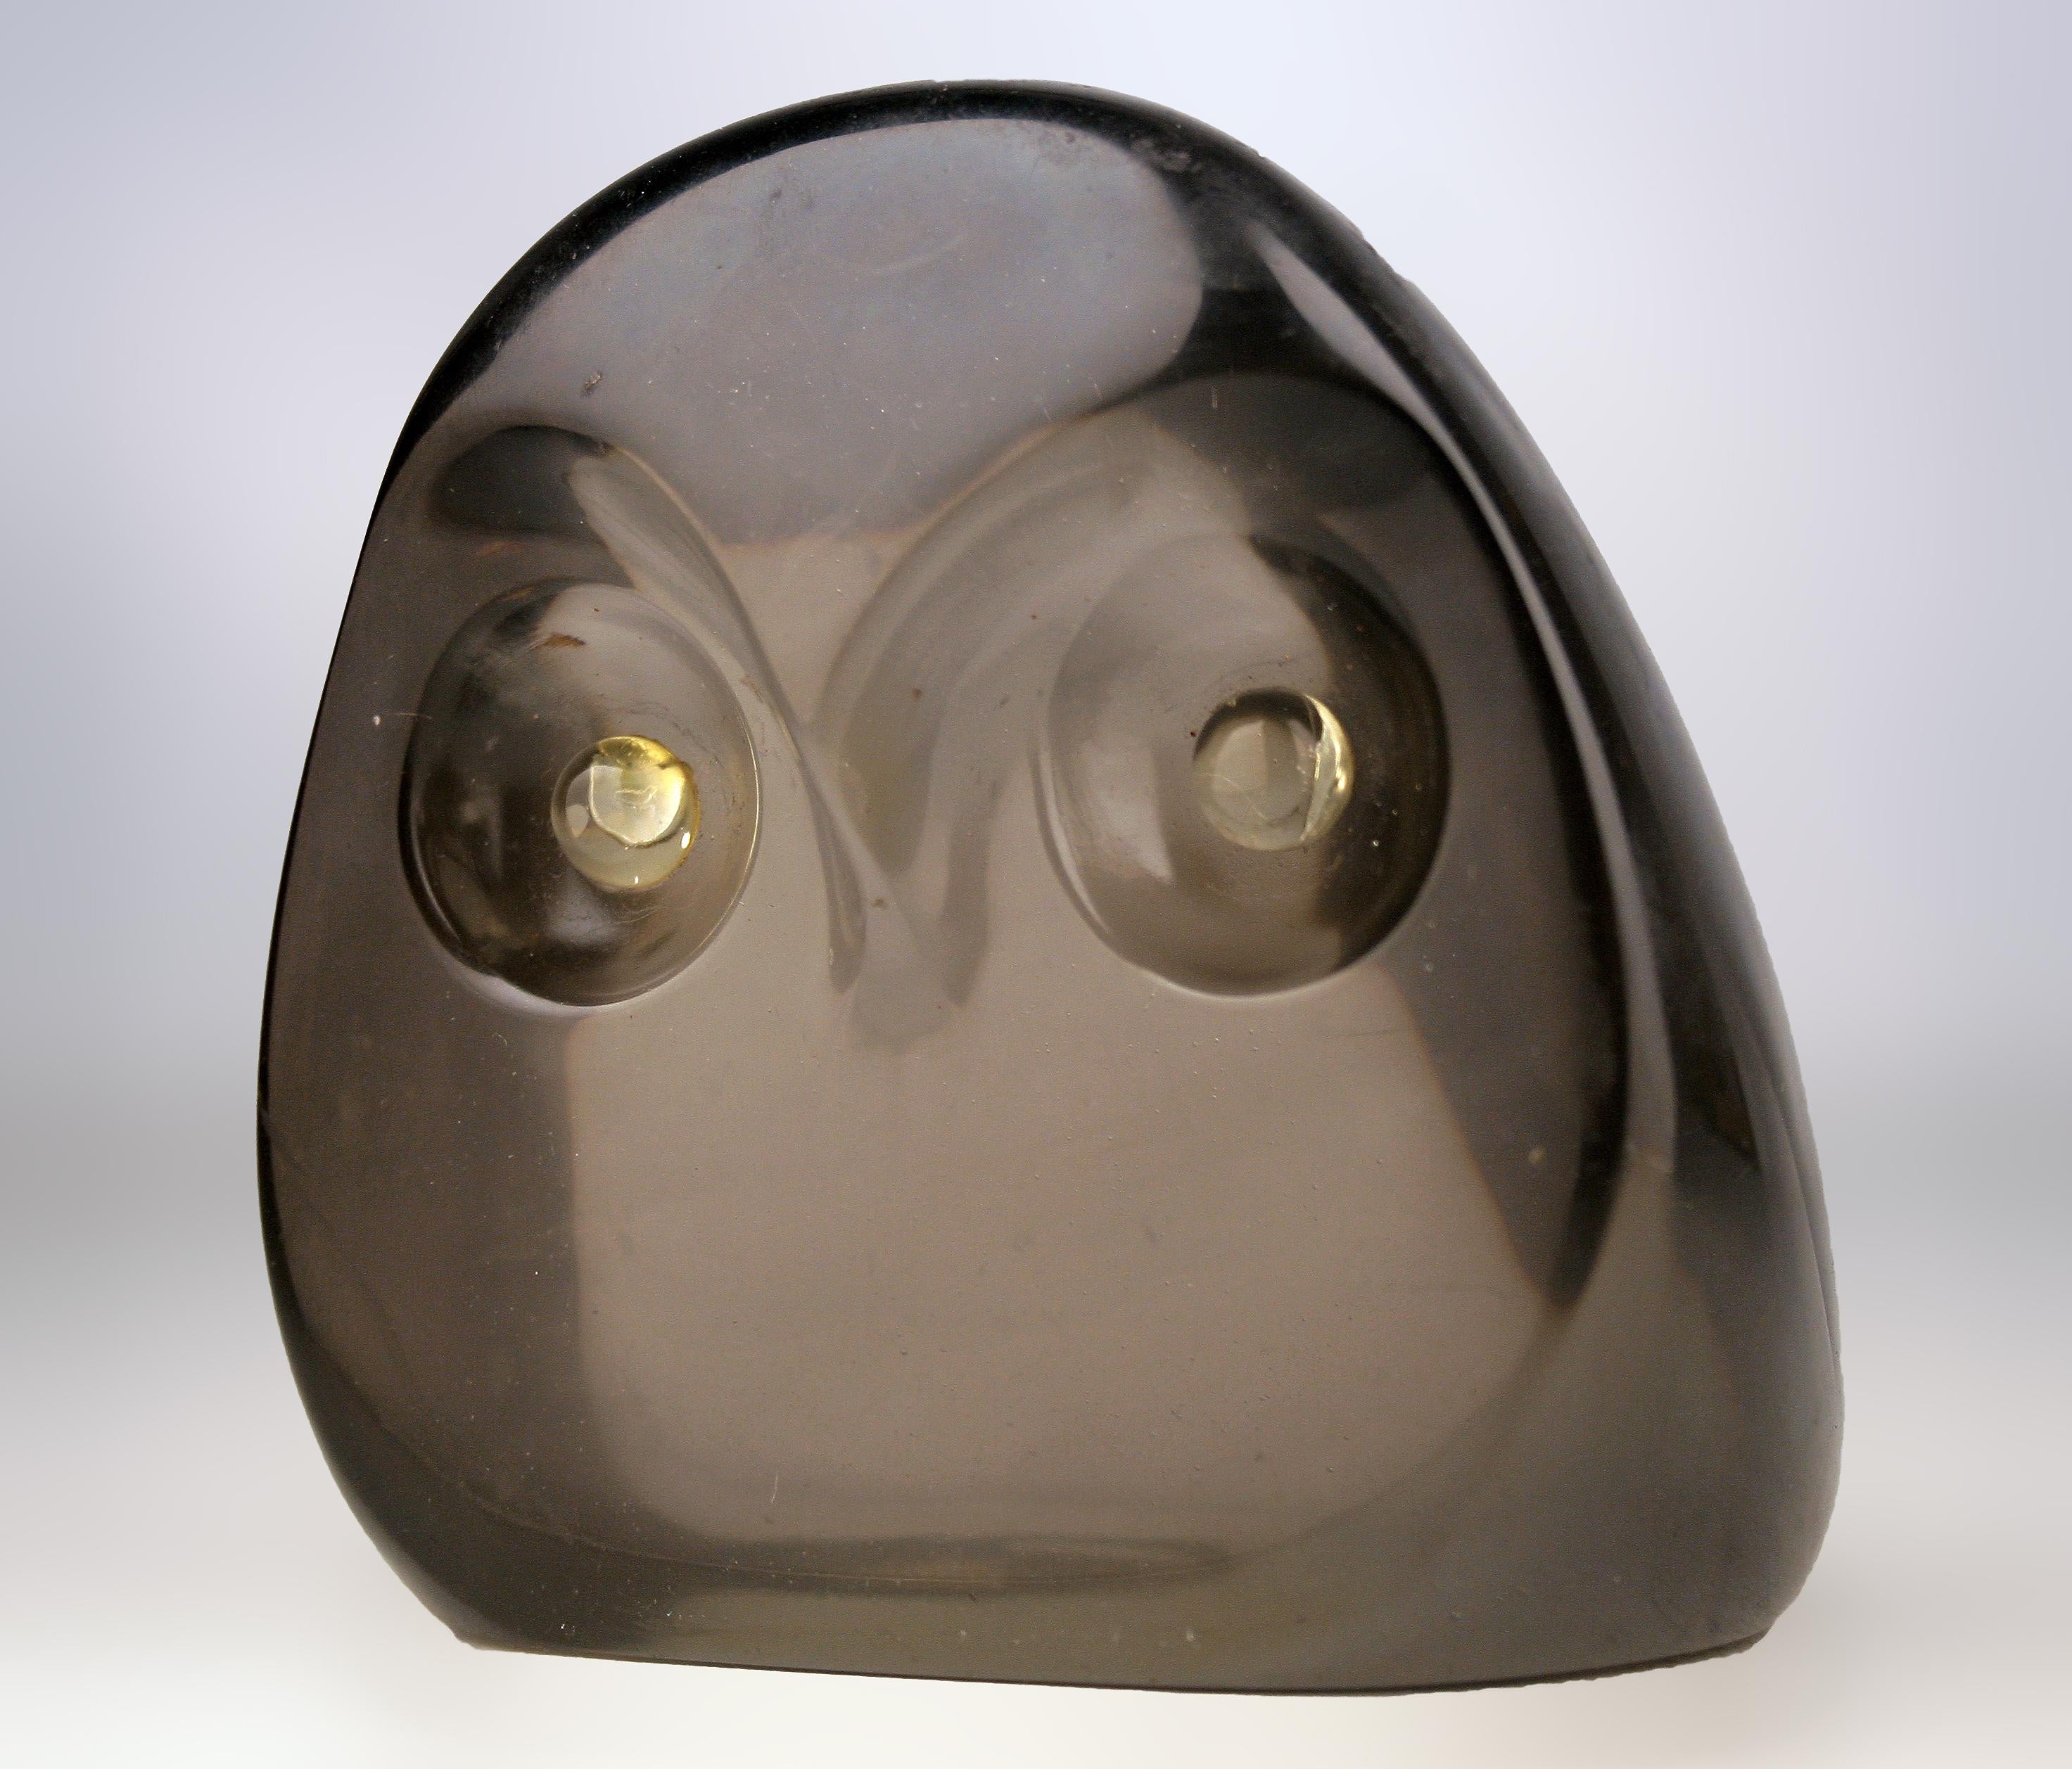 Mid-20th century Palatnik-like italian Op Art acrylic/lucite monochromatic translucent owl sculpture/paperweight

By:  Abraham Palatnik (in the style of)
Material: acrylic, lucite, synthetic
Technique: polished, molded, cast
Dimensions: 3 in x 4 in